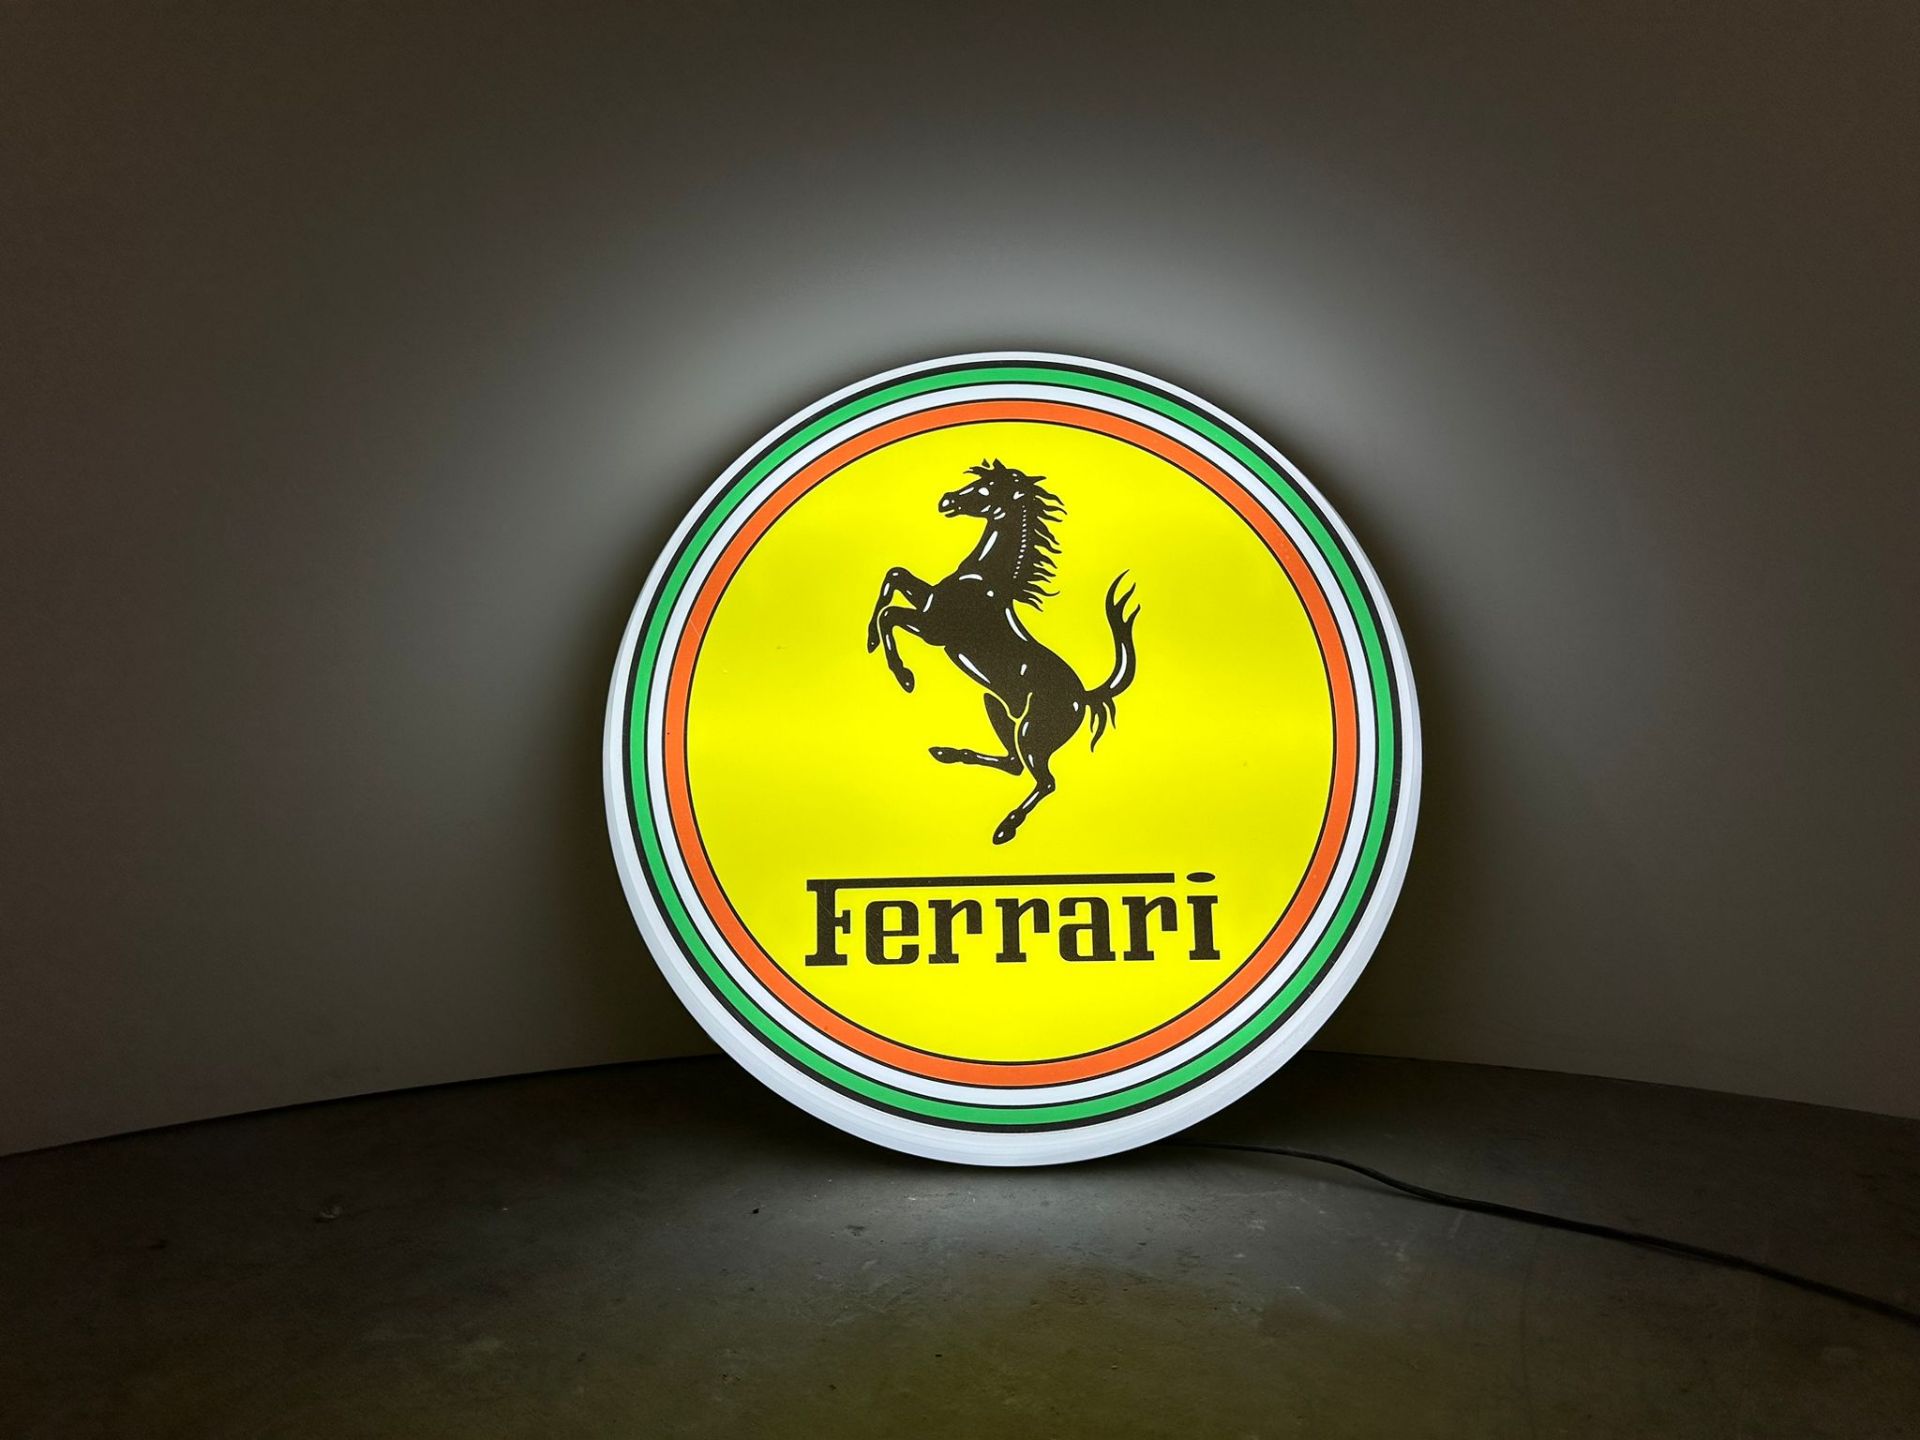 Ferrarivfully working illuminated adapted to any country